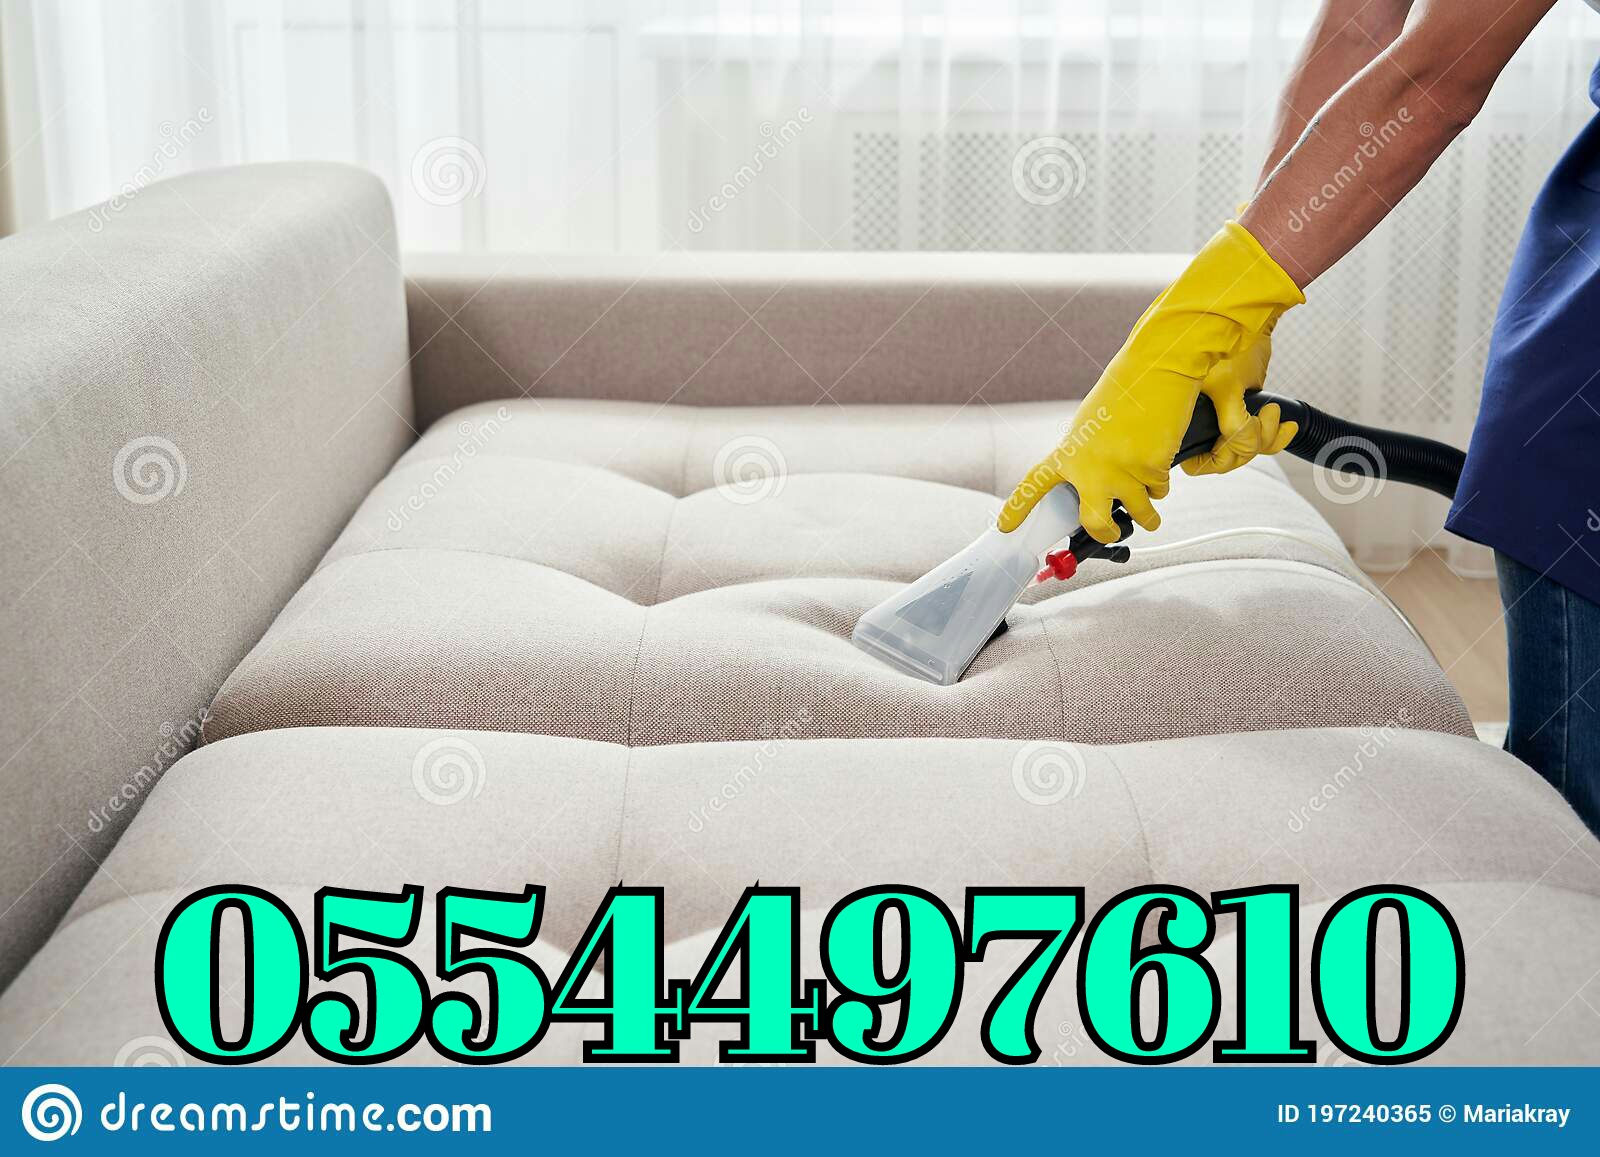 Cleaning Solutions Call 0554497610 Sofa, Carpet, Mattress Rug